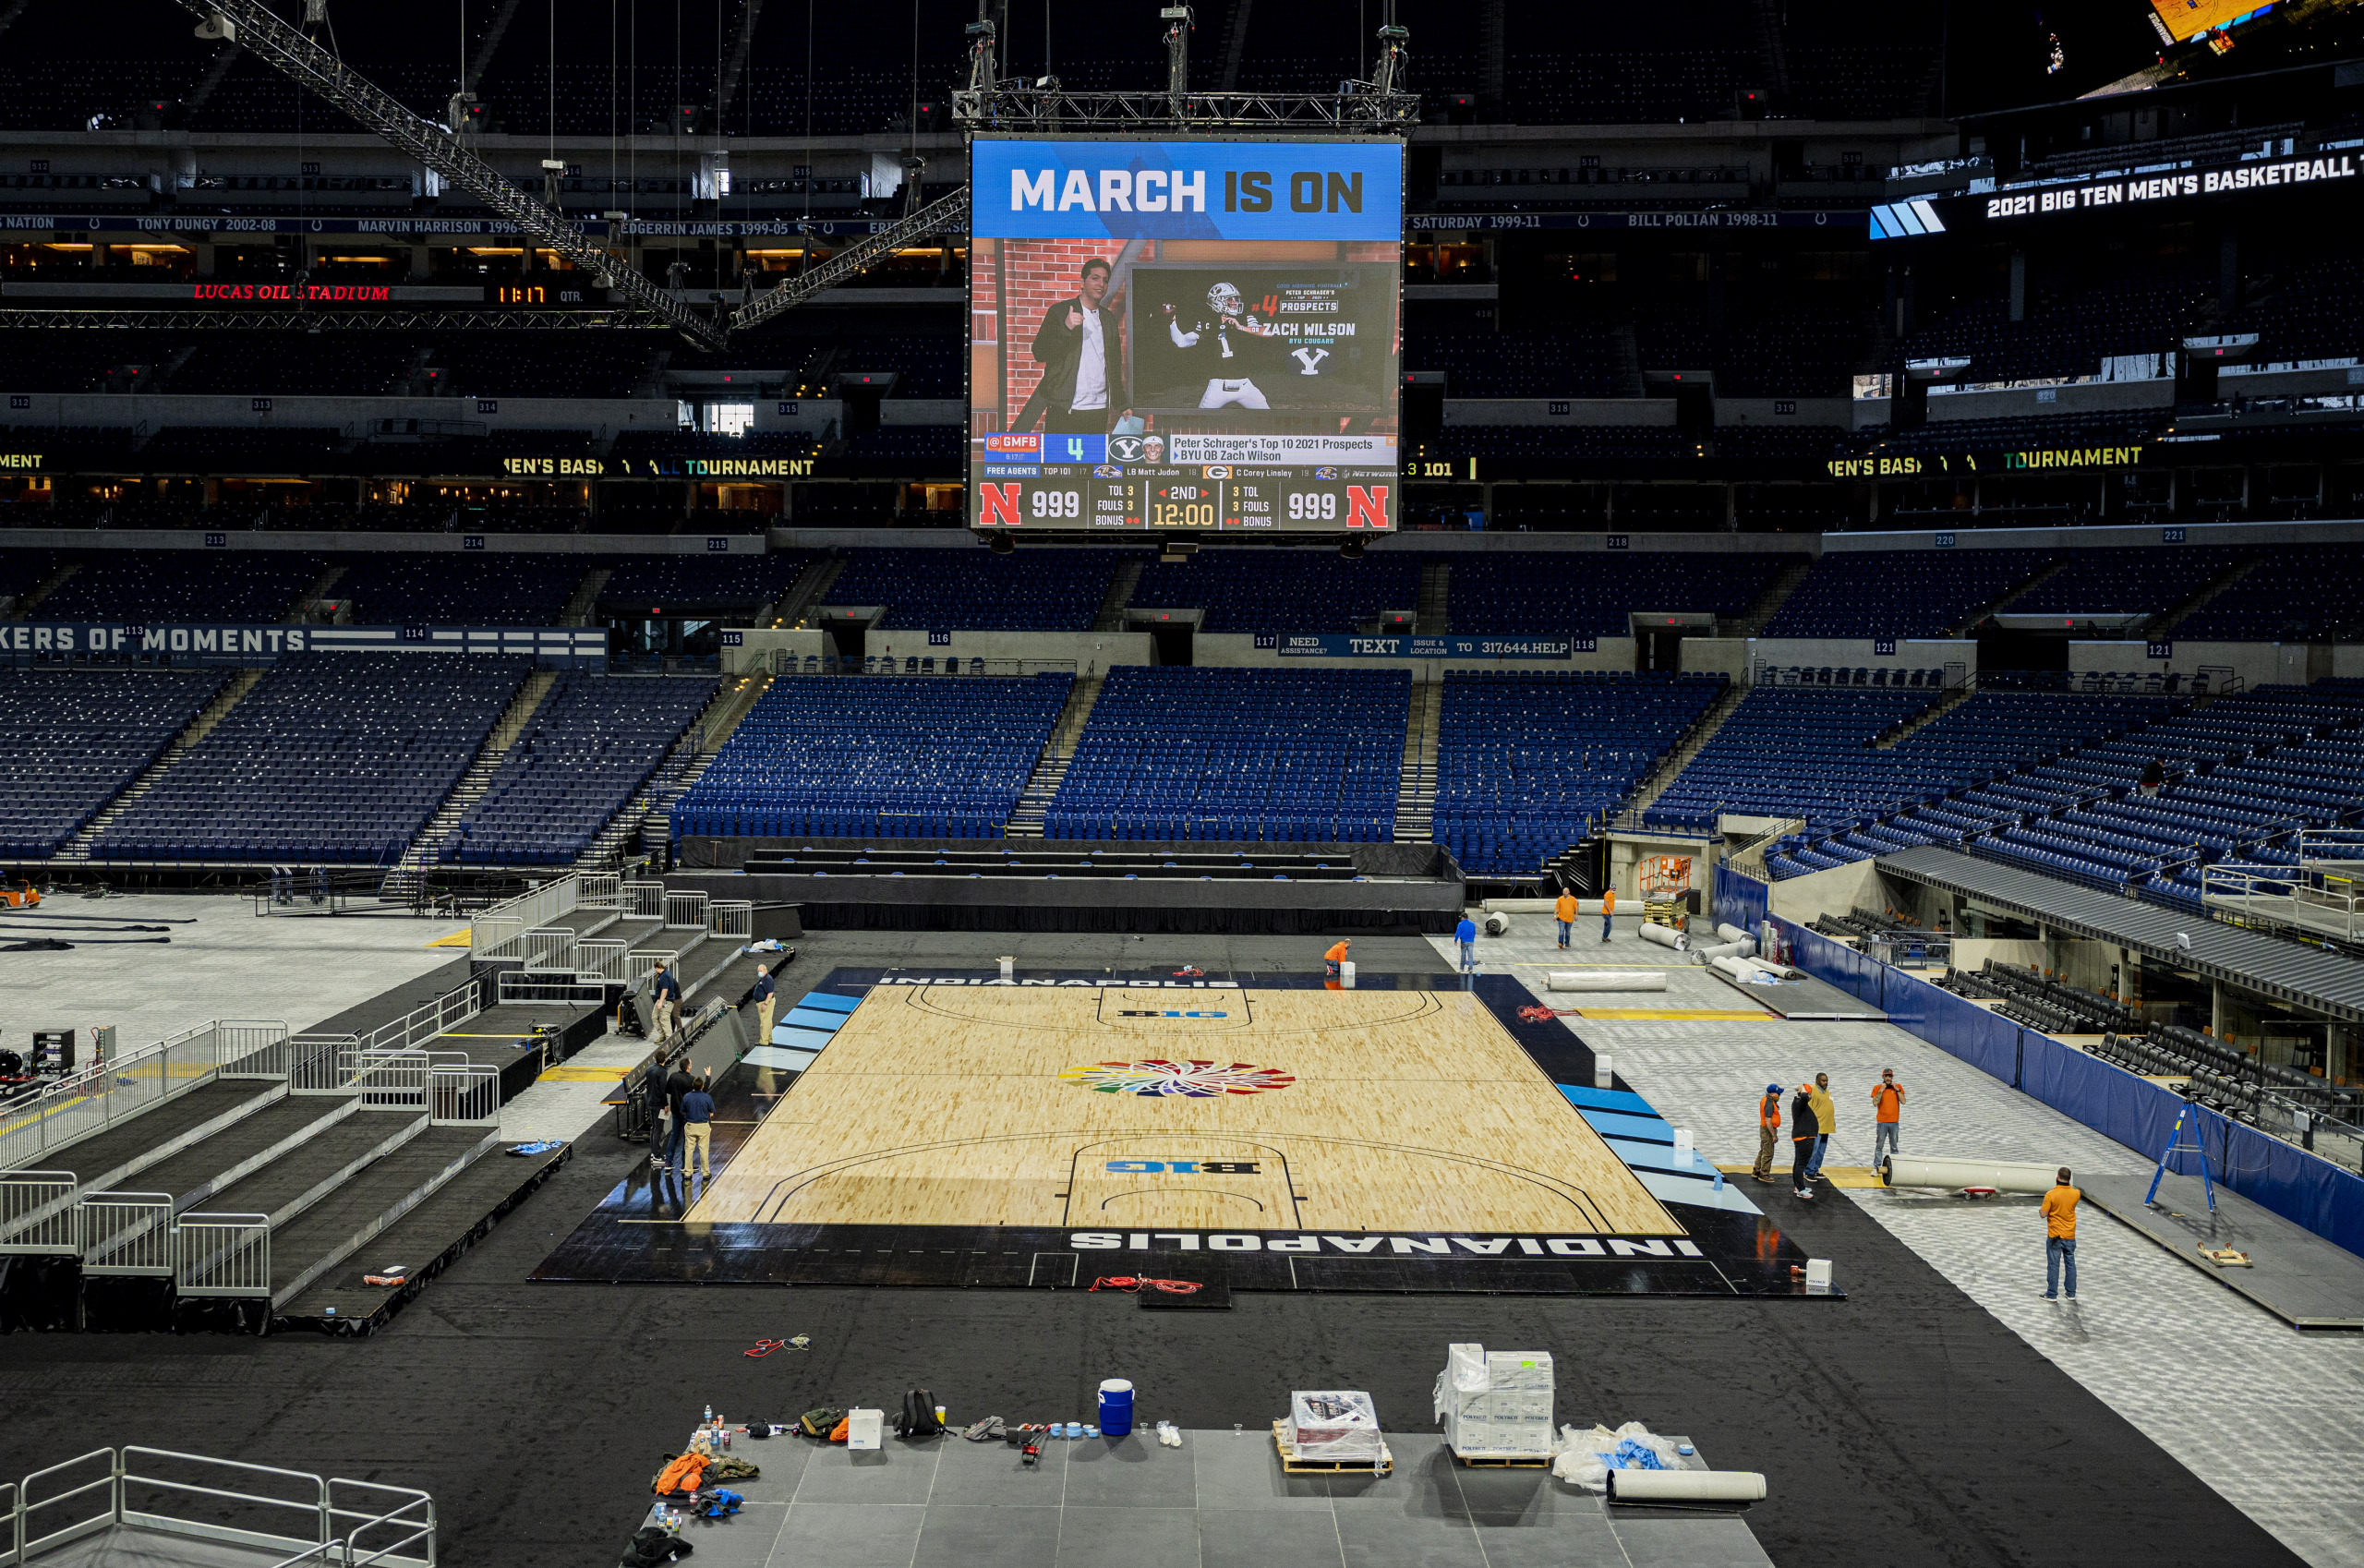 NCAA tournamentgoers will see changes in ticket sales, differences at